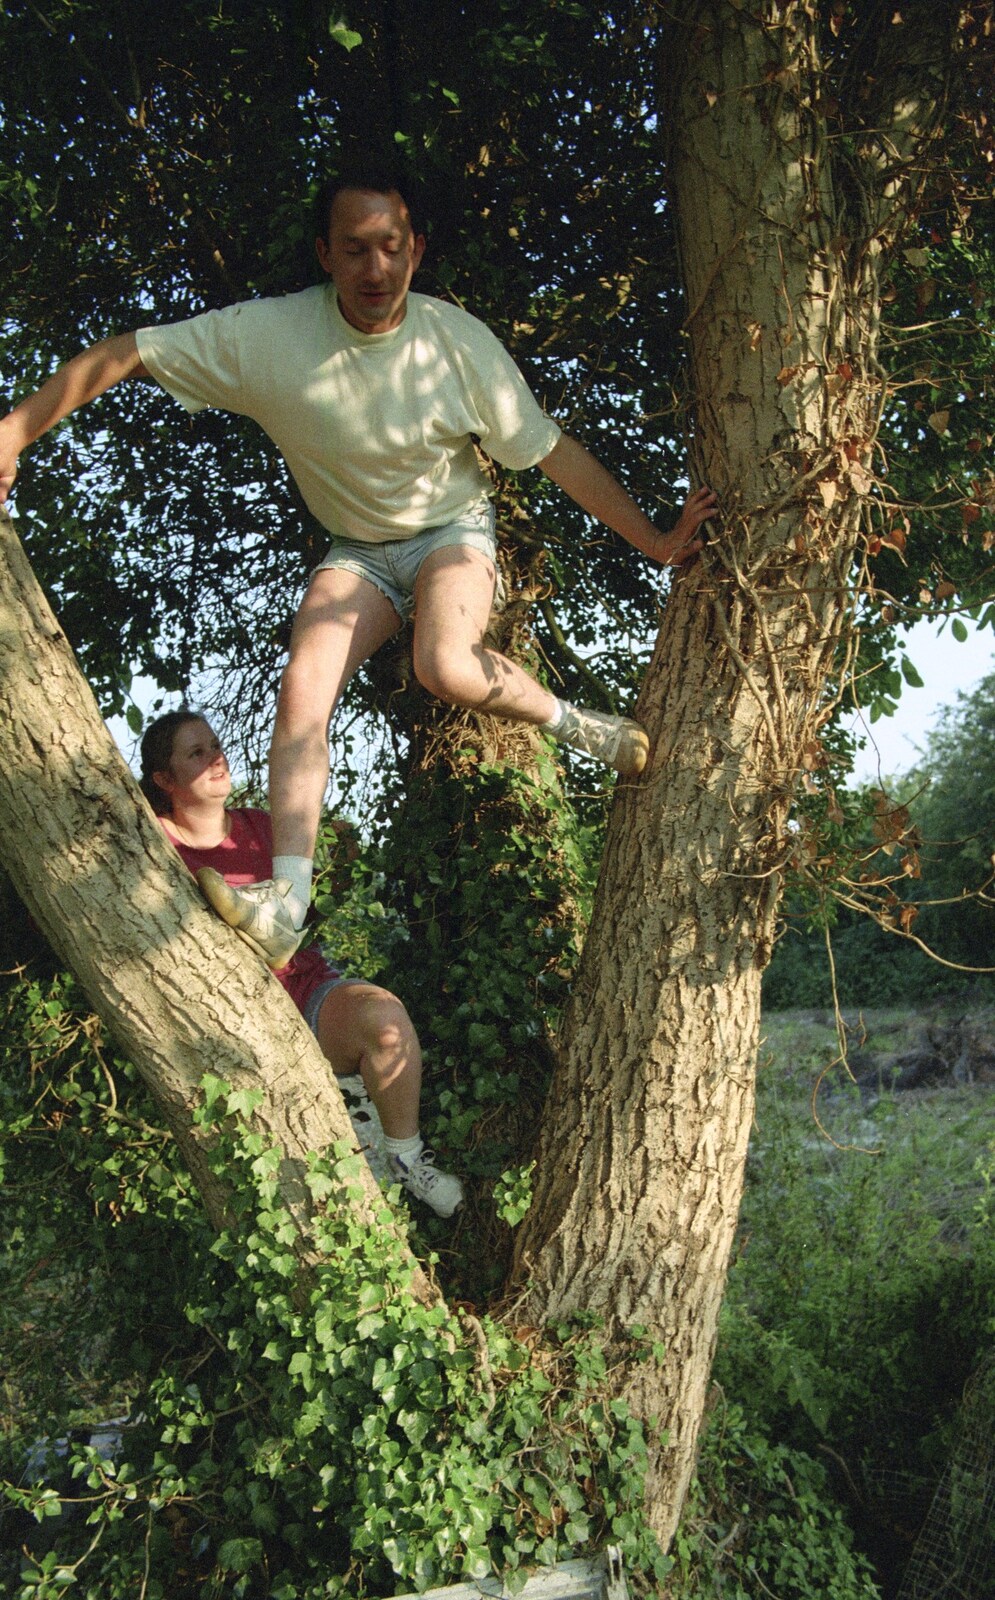 Pauline and DH climb the walnut tree from Andrew's CISU Party, and Nosher's Garden Barbeque, Ipswich and Brome, Suffolk - June 10th 1998